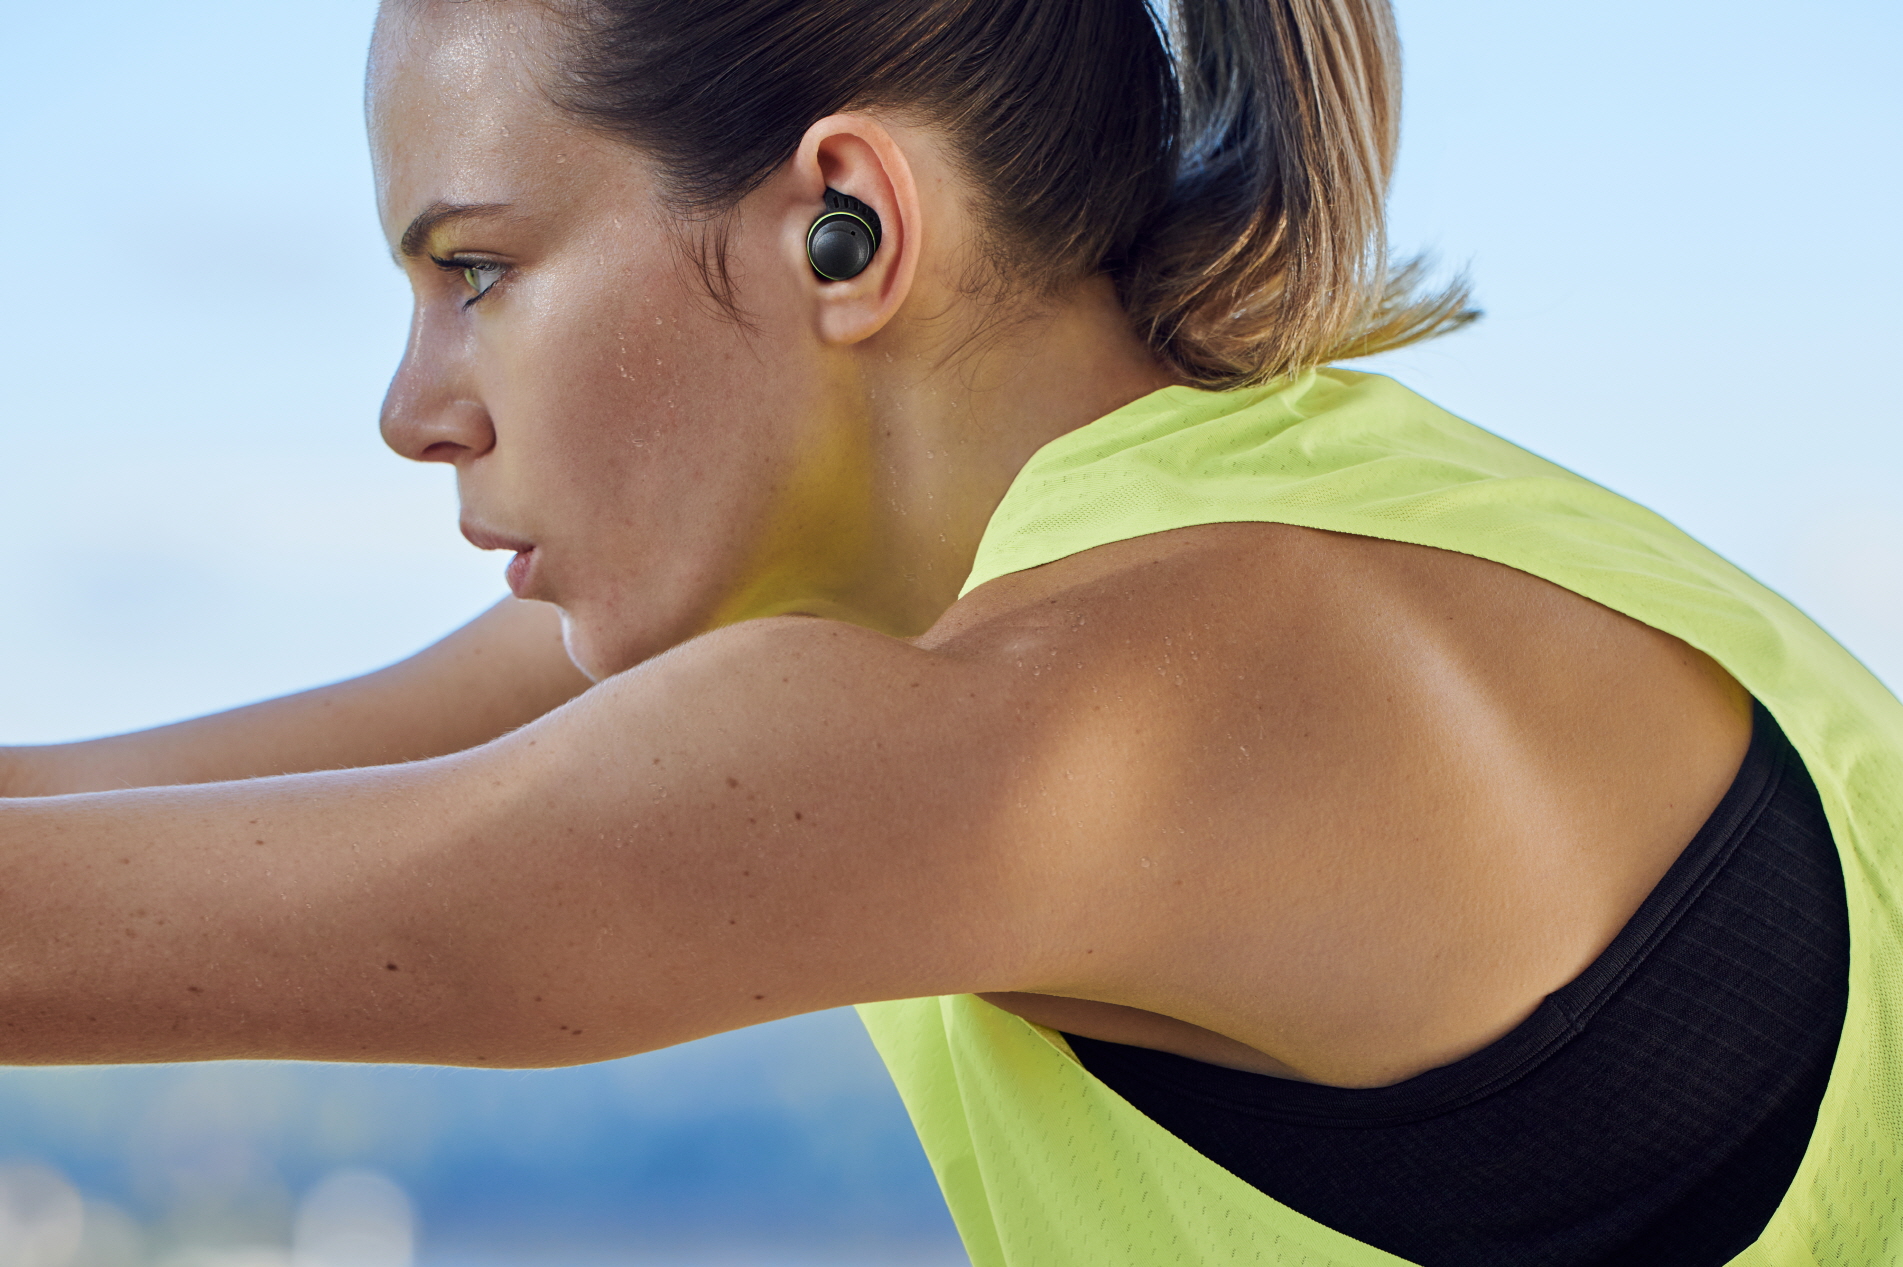 image of woman exercising with earbuds on